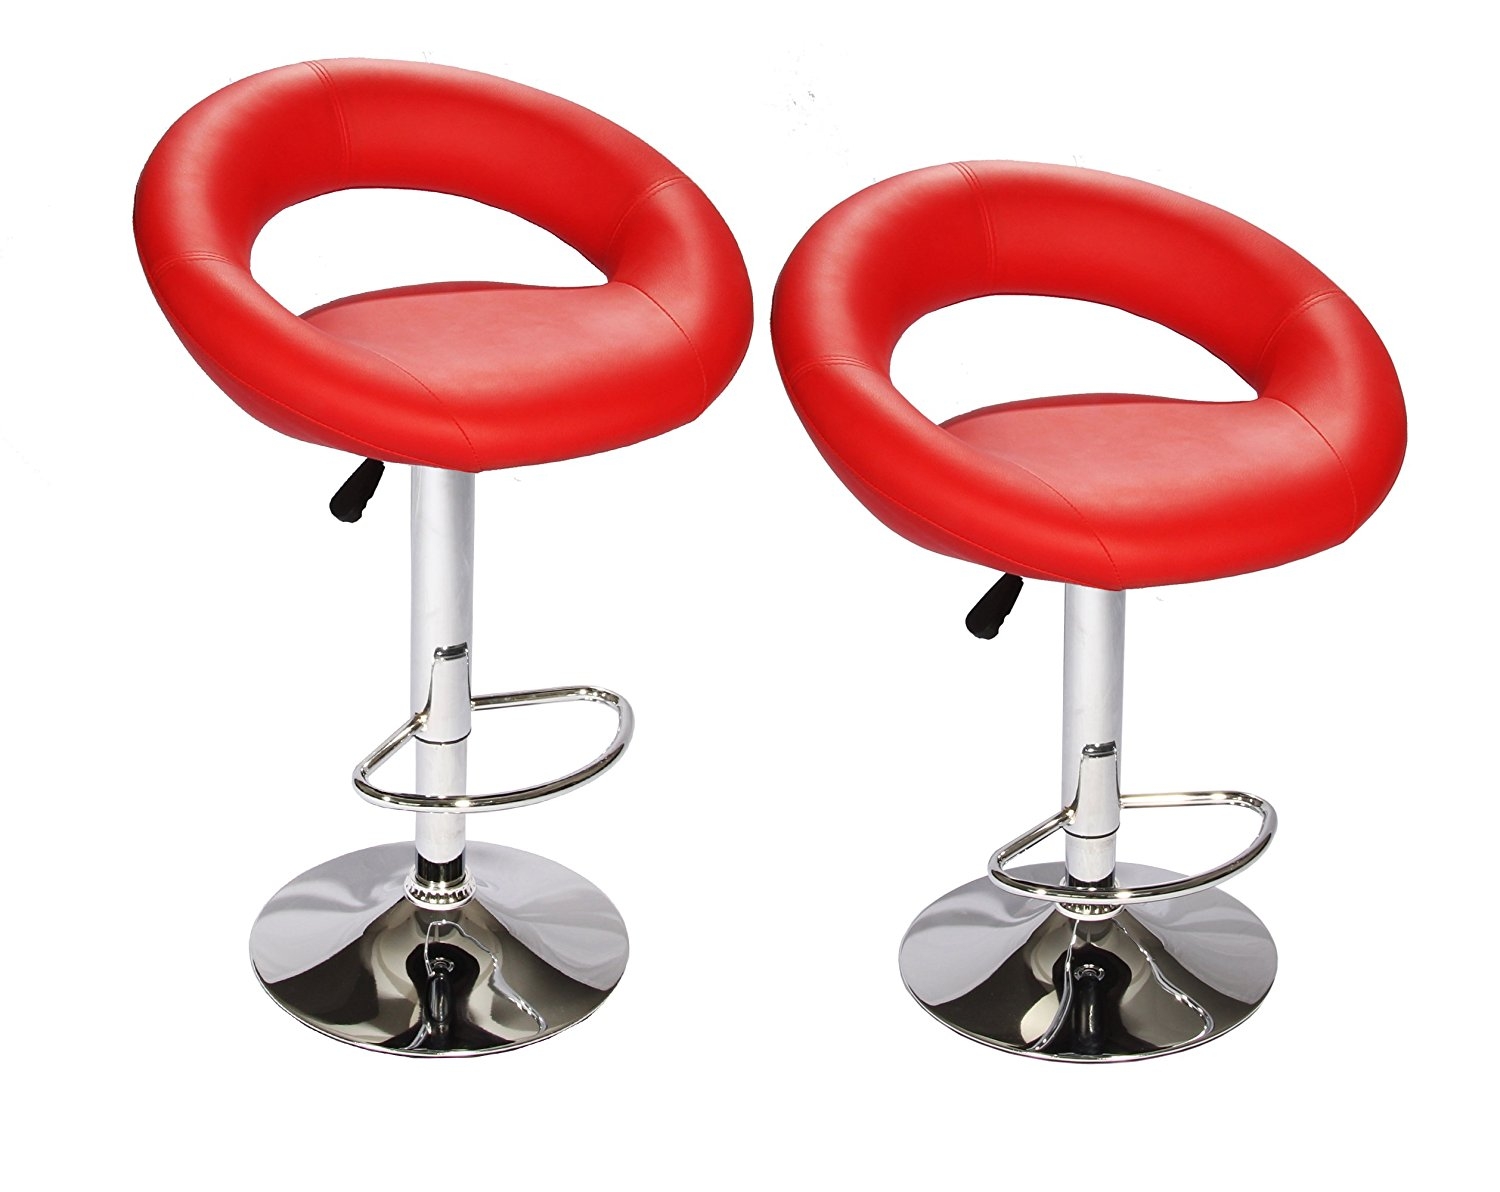 Red Modern Adjustable Synthetic Leather Swivel Bar Stools Chairs B02-Sets of 2